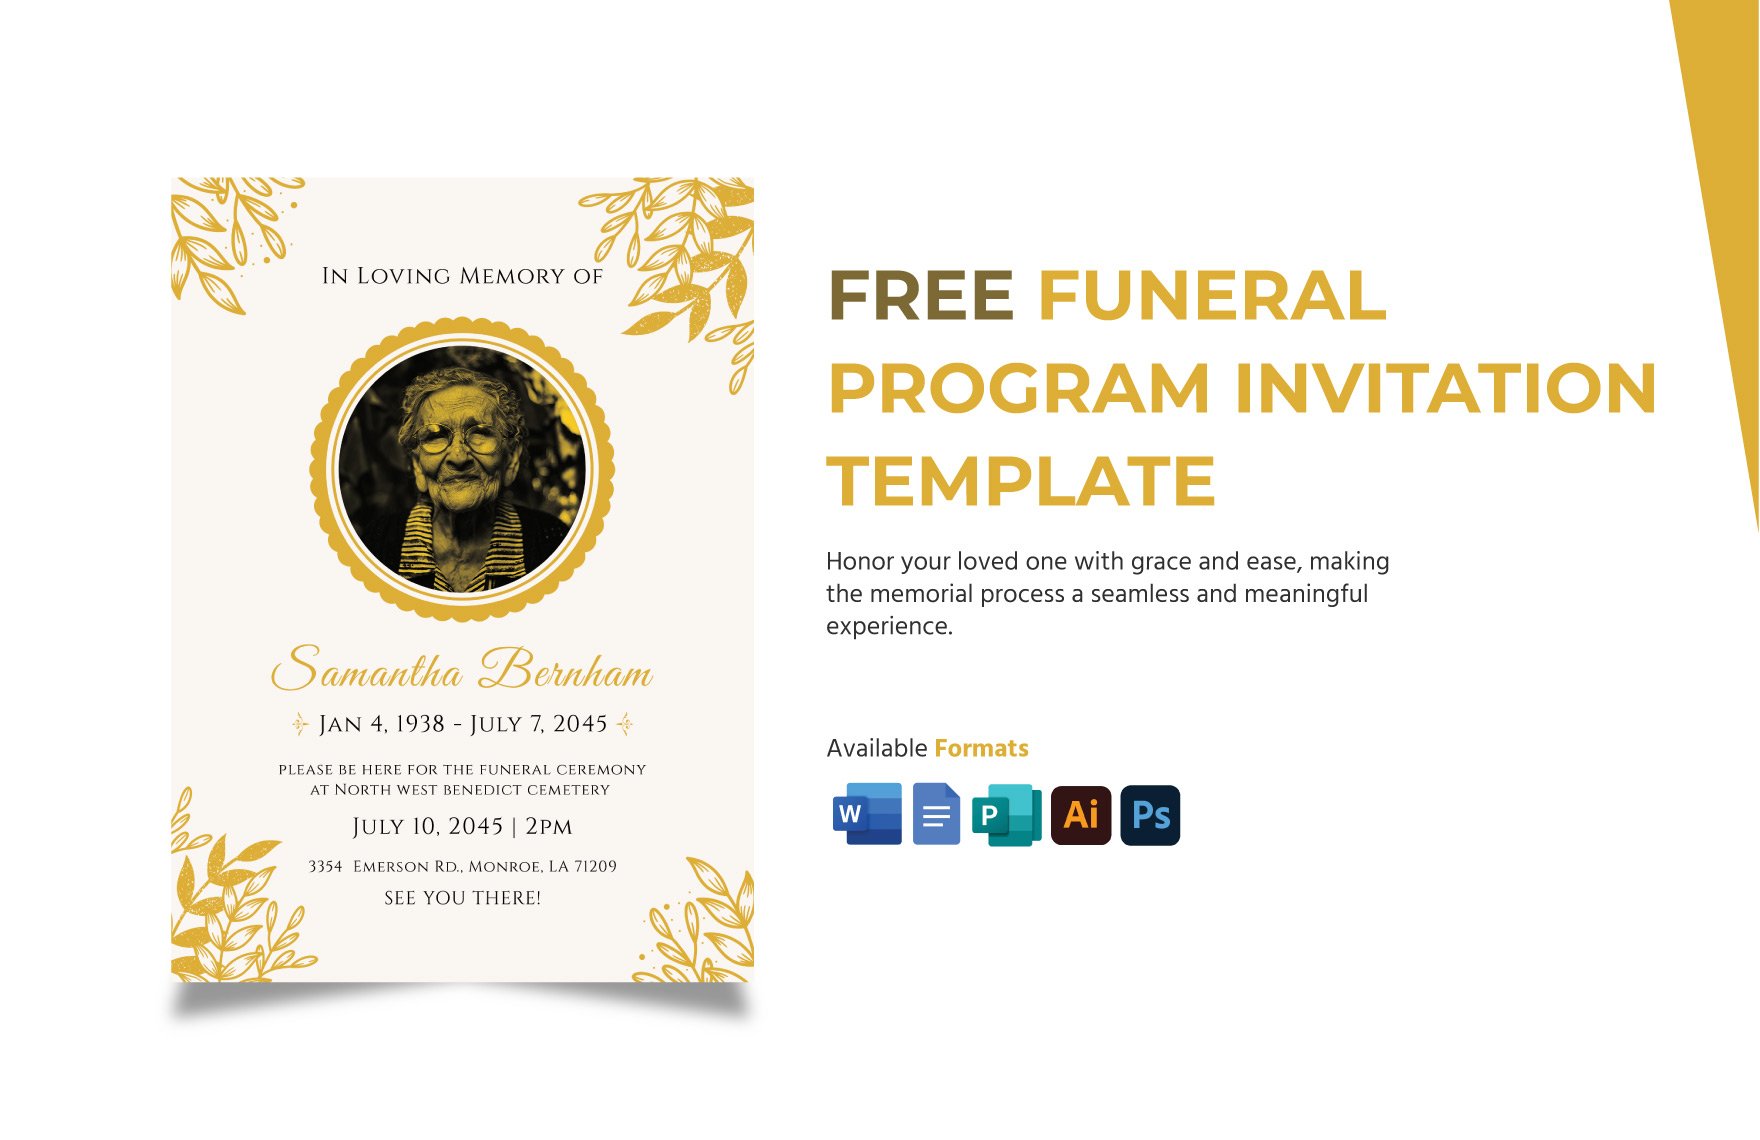 Free Funeral Program Invitation Template in Word, PDF, Illustrator, PSD, Apple Pages, Publisher, Outlook